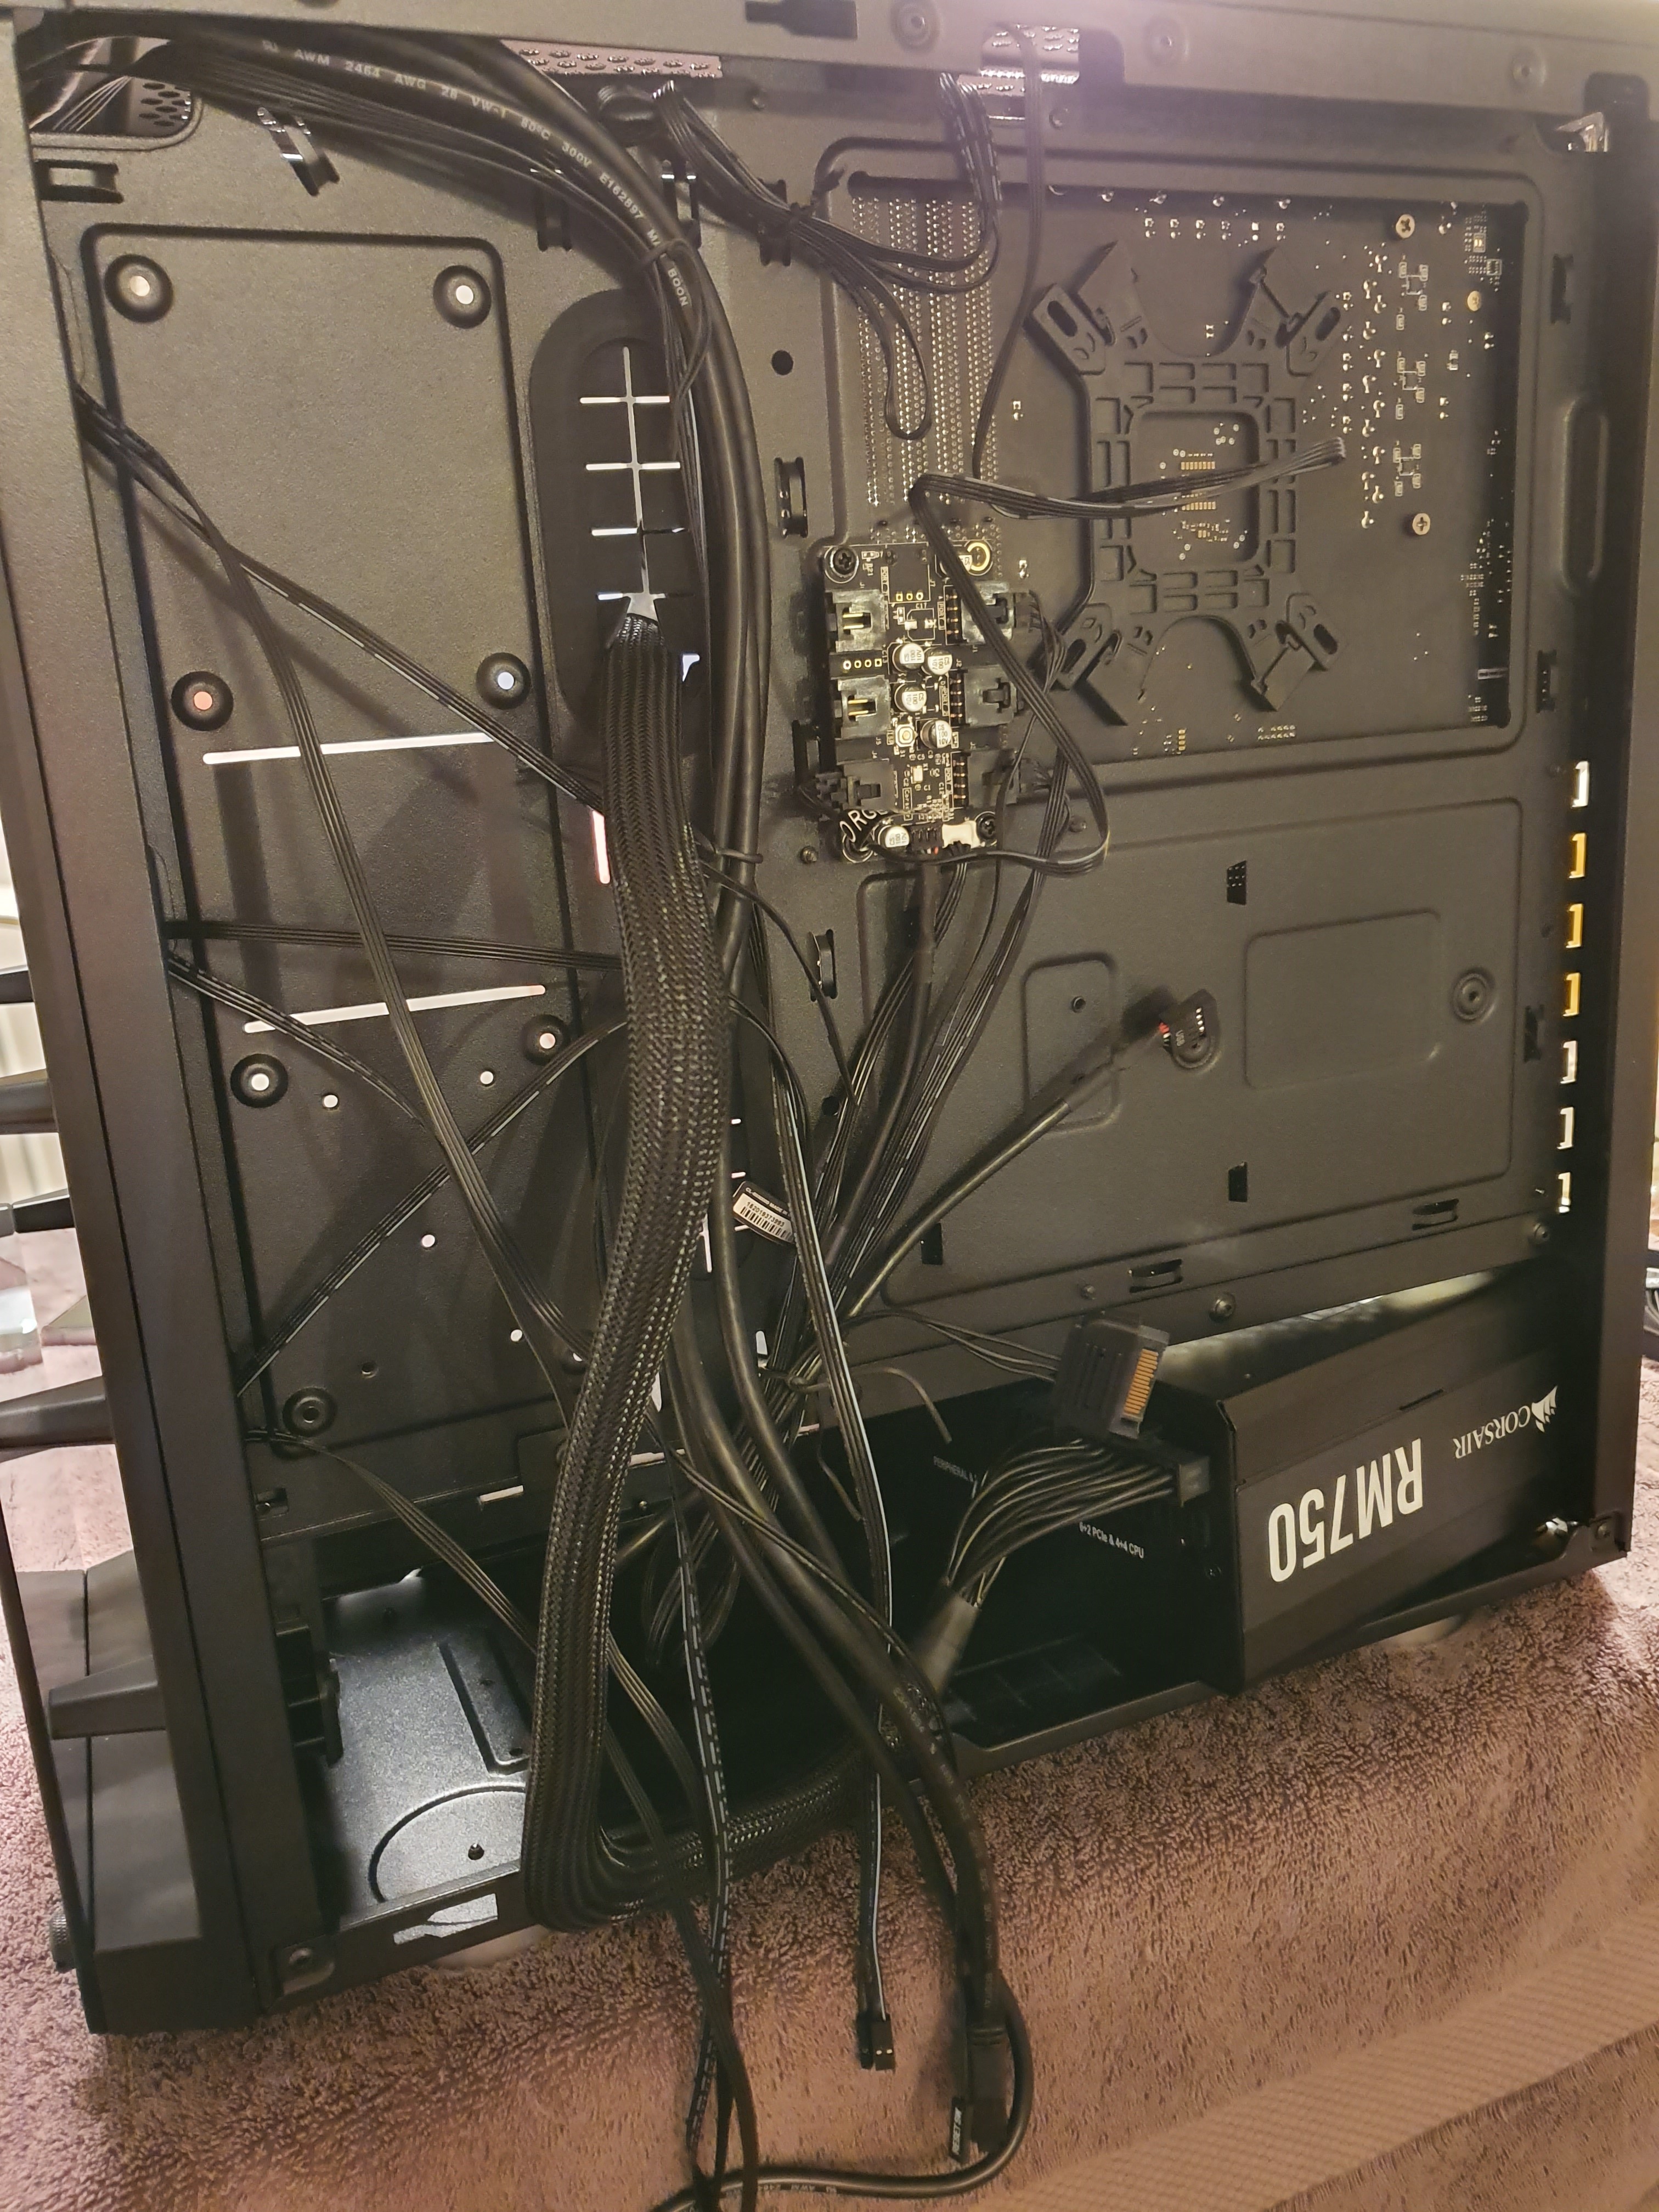 messy cables